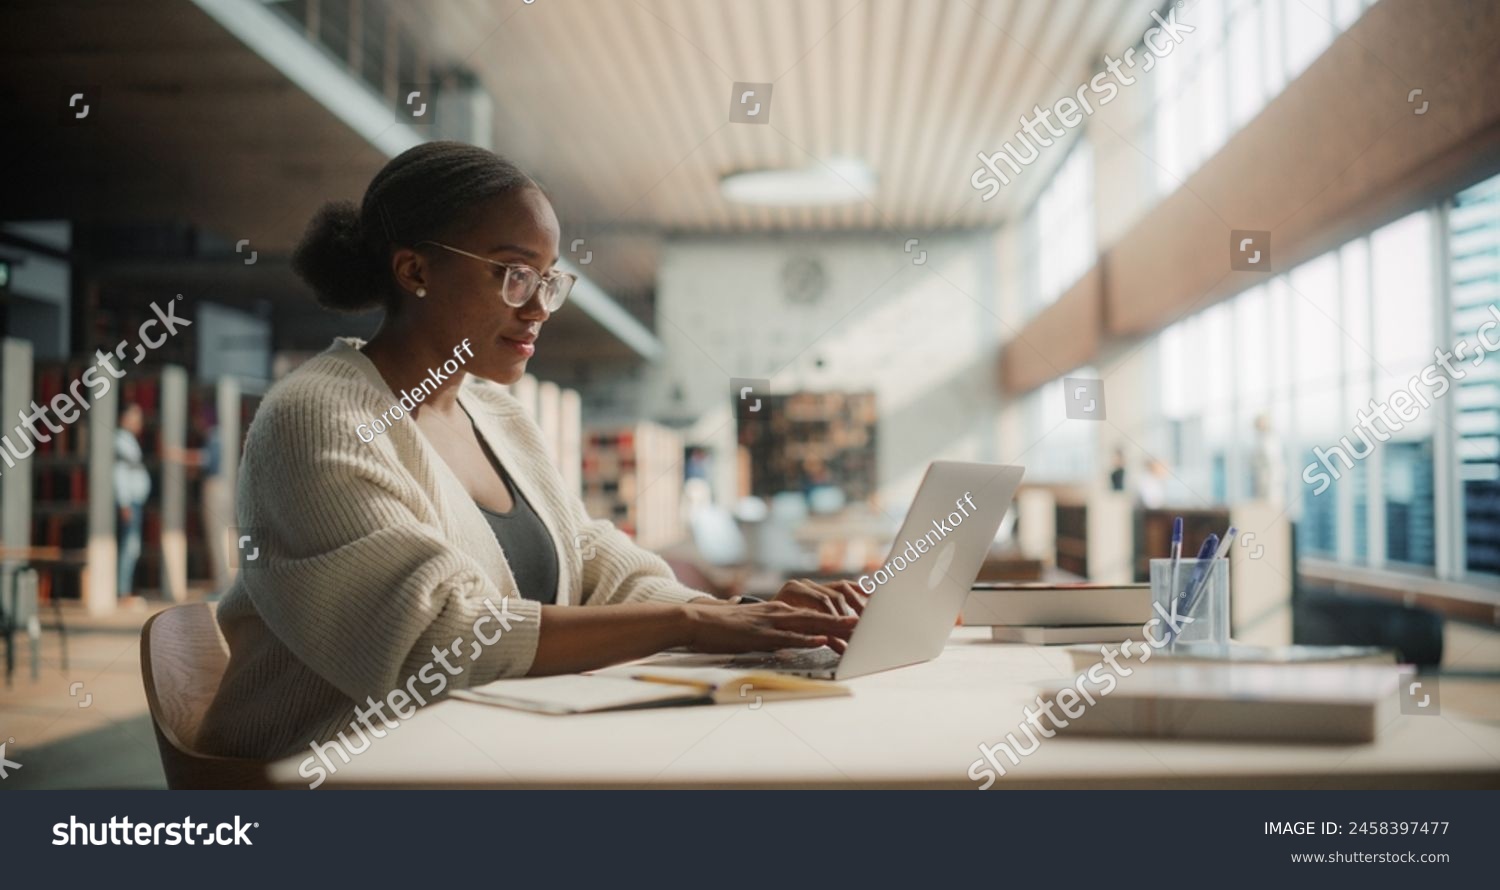 Dedicated African American Female Student Engaged in Online Learning at a Modern Library. Young Woman Using Laptop for Research, Surrounded by Books and Academic Environment.